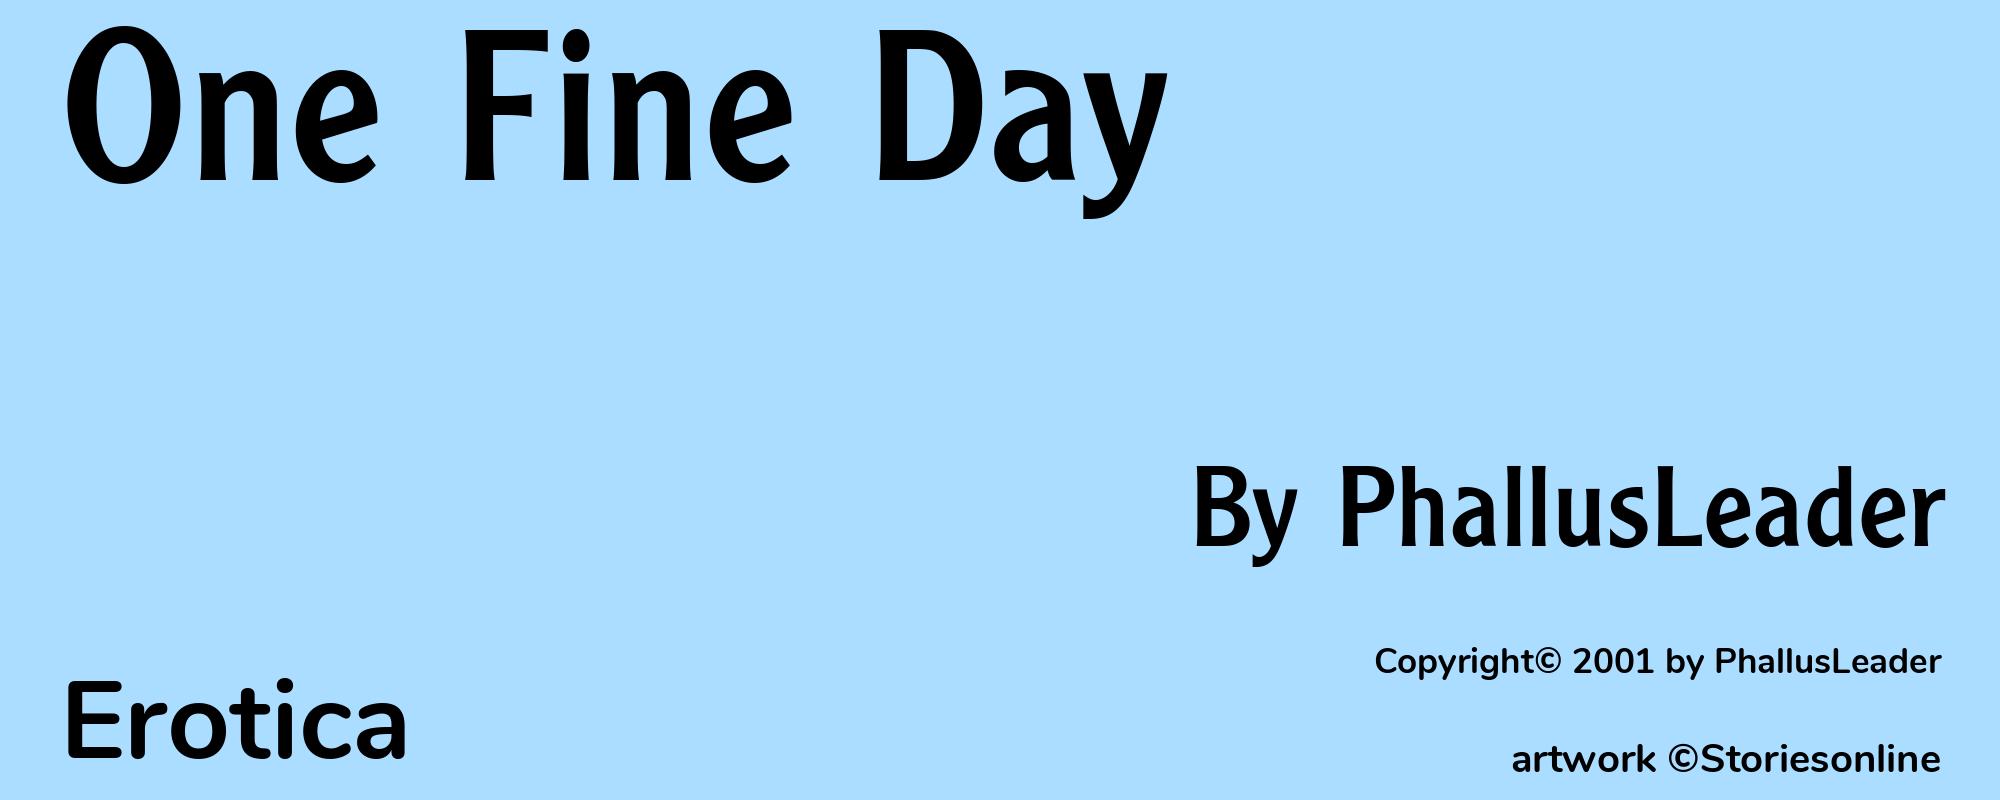 One Fine Day - Cover